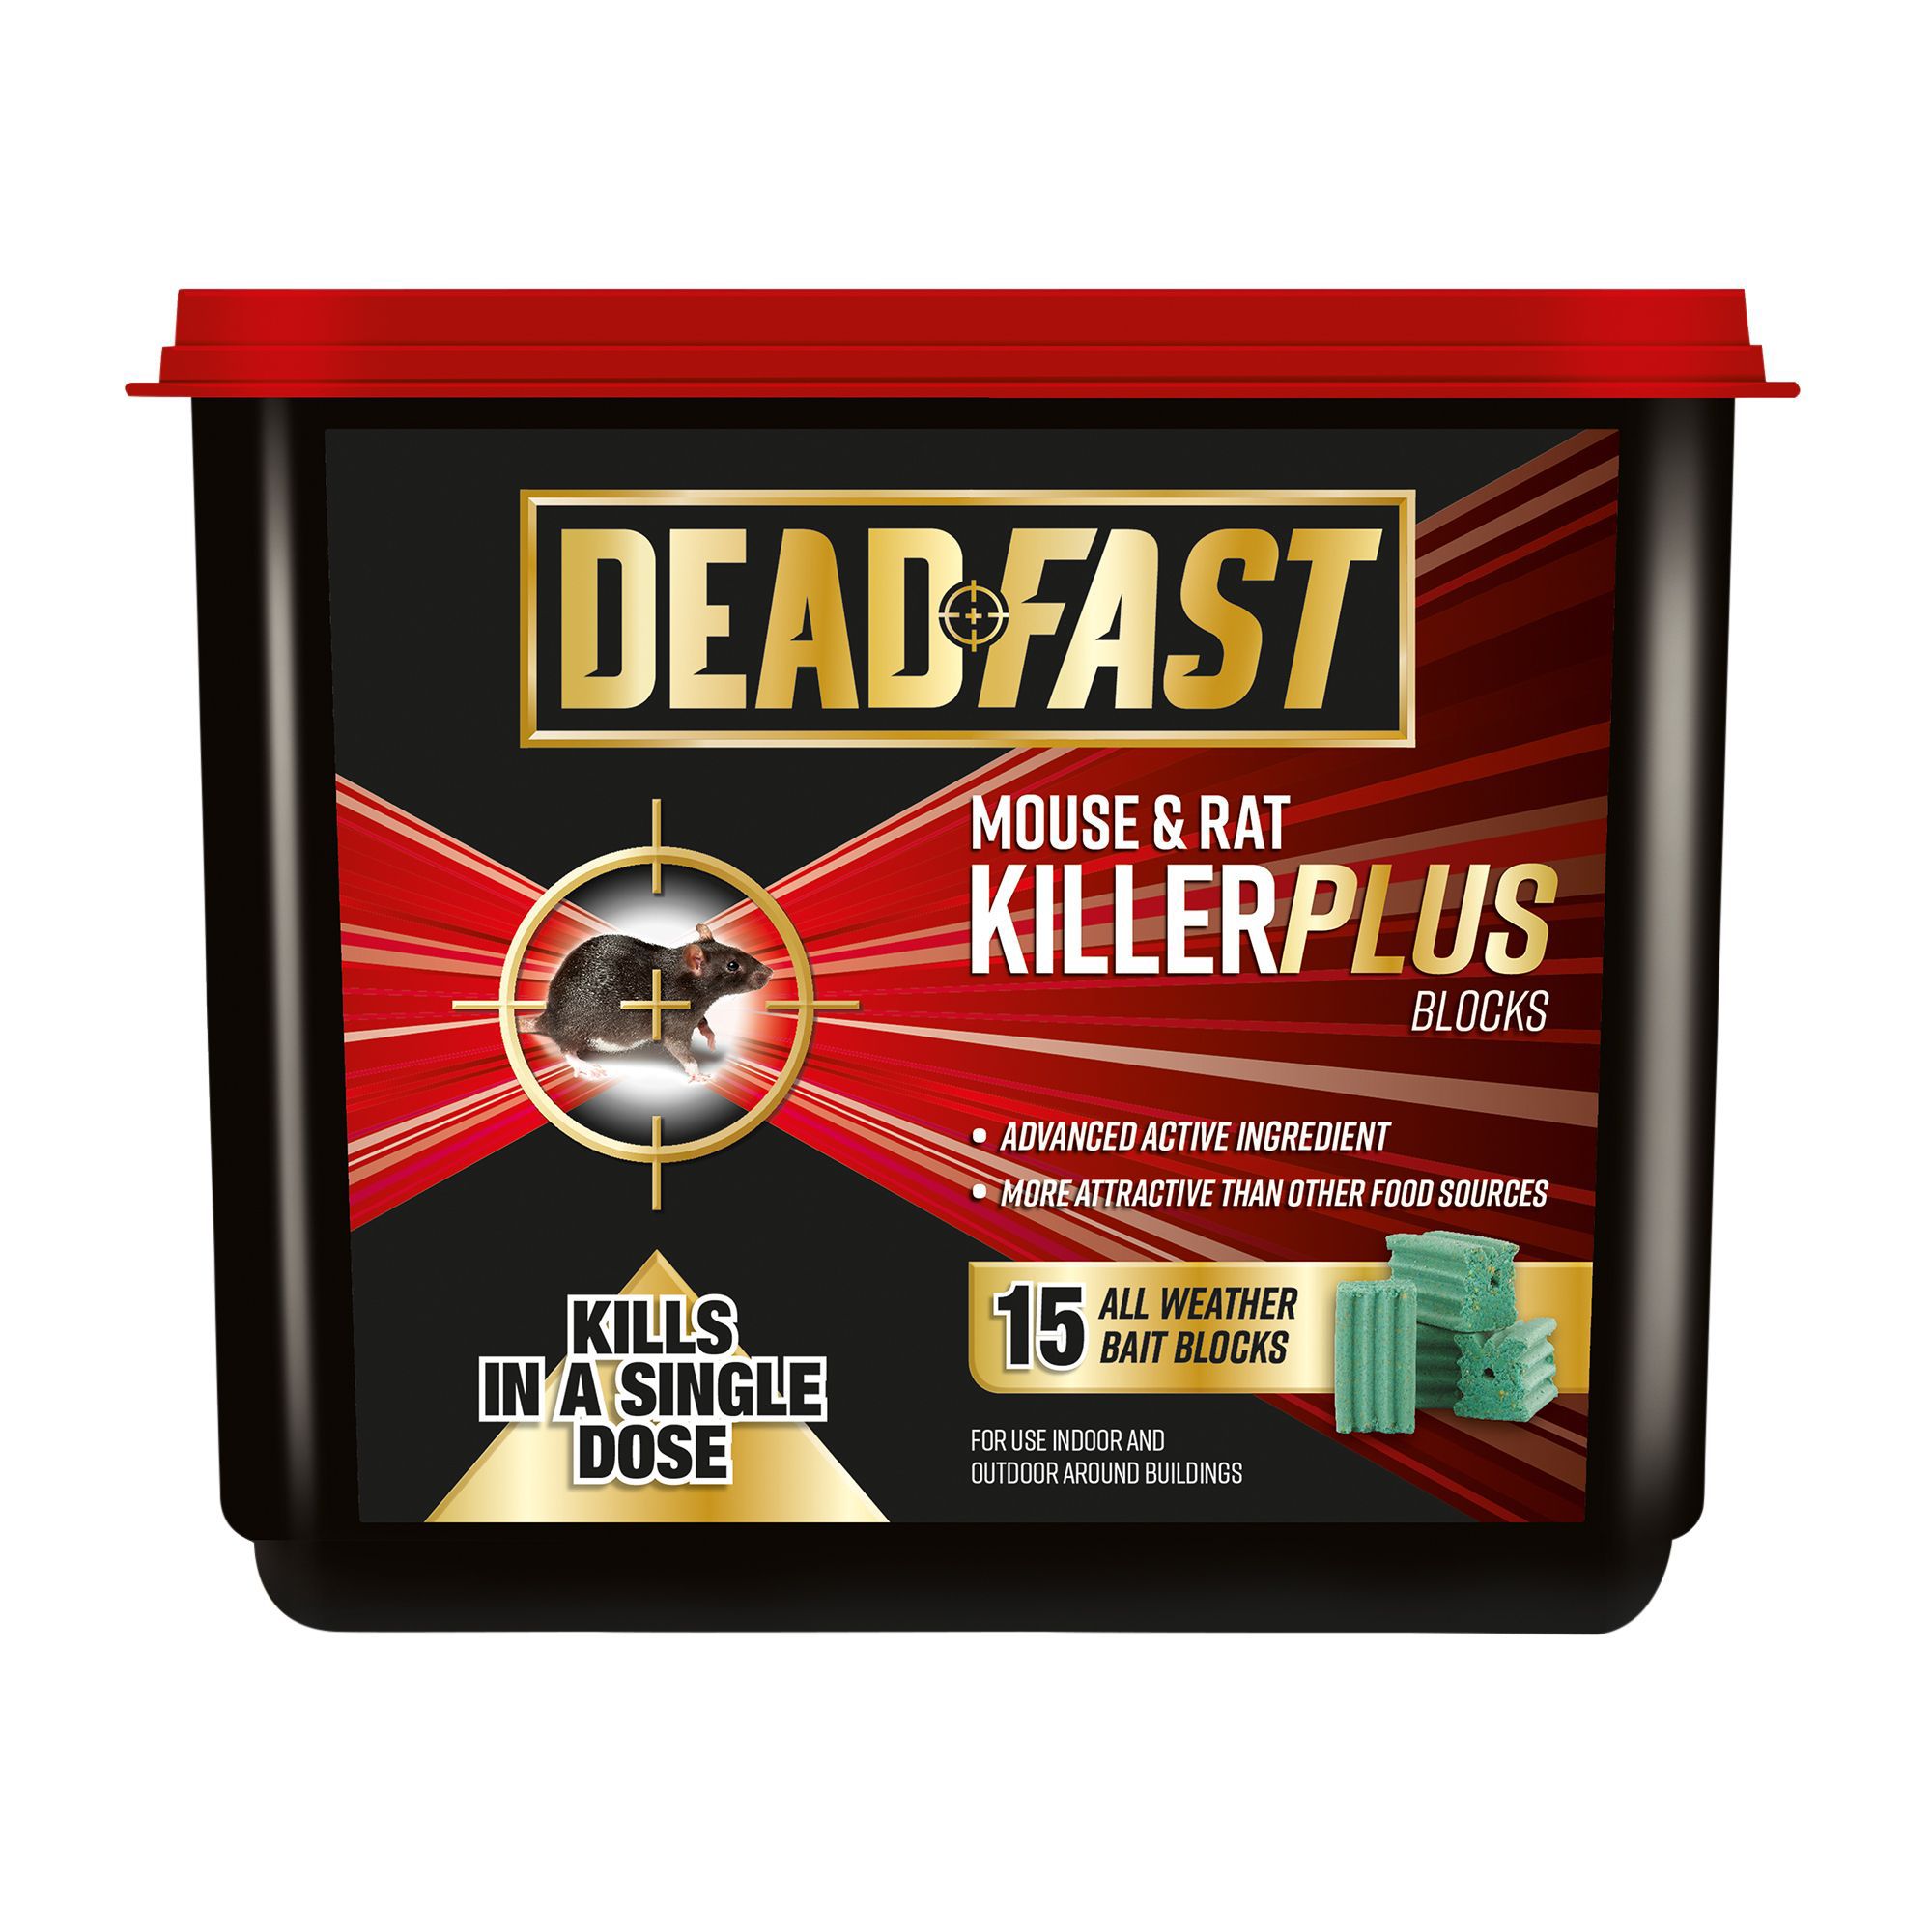 Deadfast Rodents Plus Rodenticide, Pack of 15, 300g